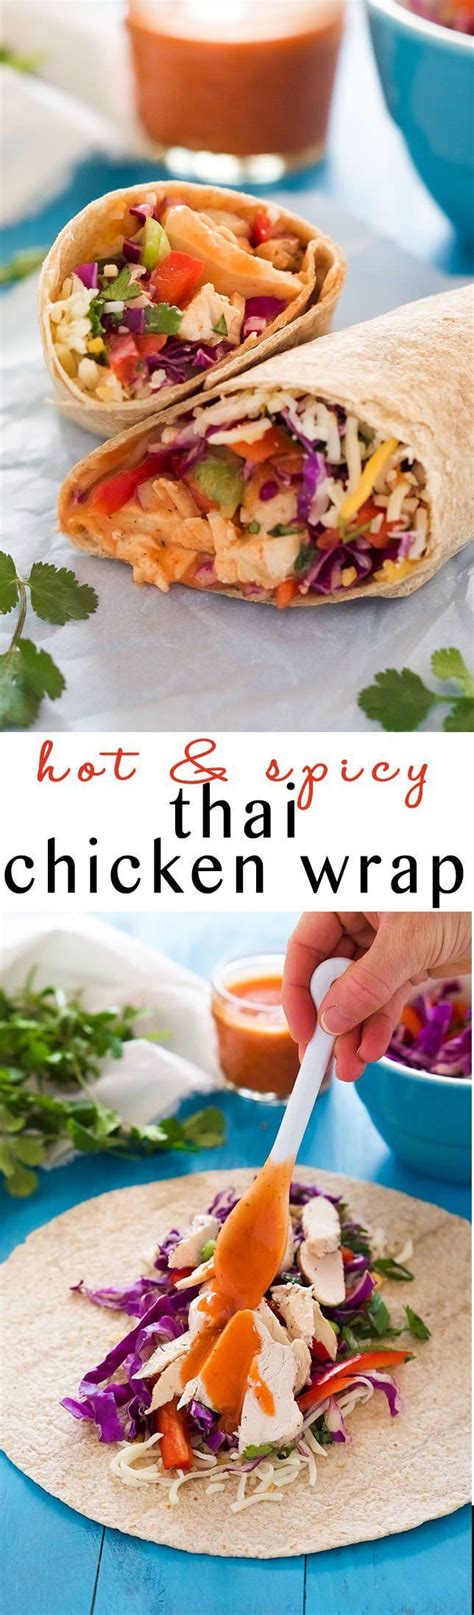 Hot & Spicy Thai Chicken Wrap - With Salt and Wit | Chicken wraps, Thai chicken wraps, Chicken ...